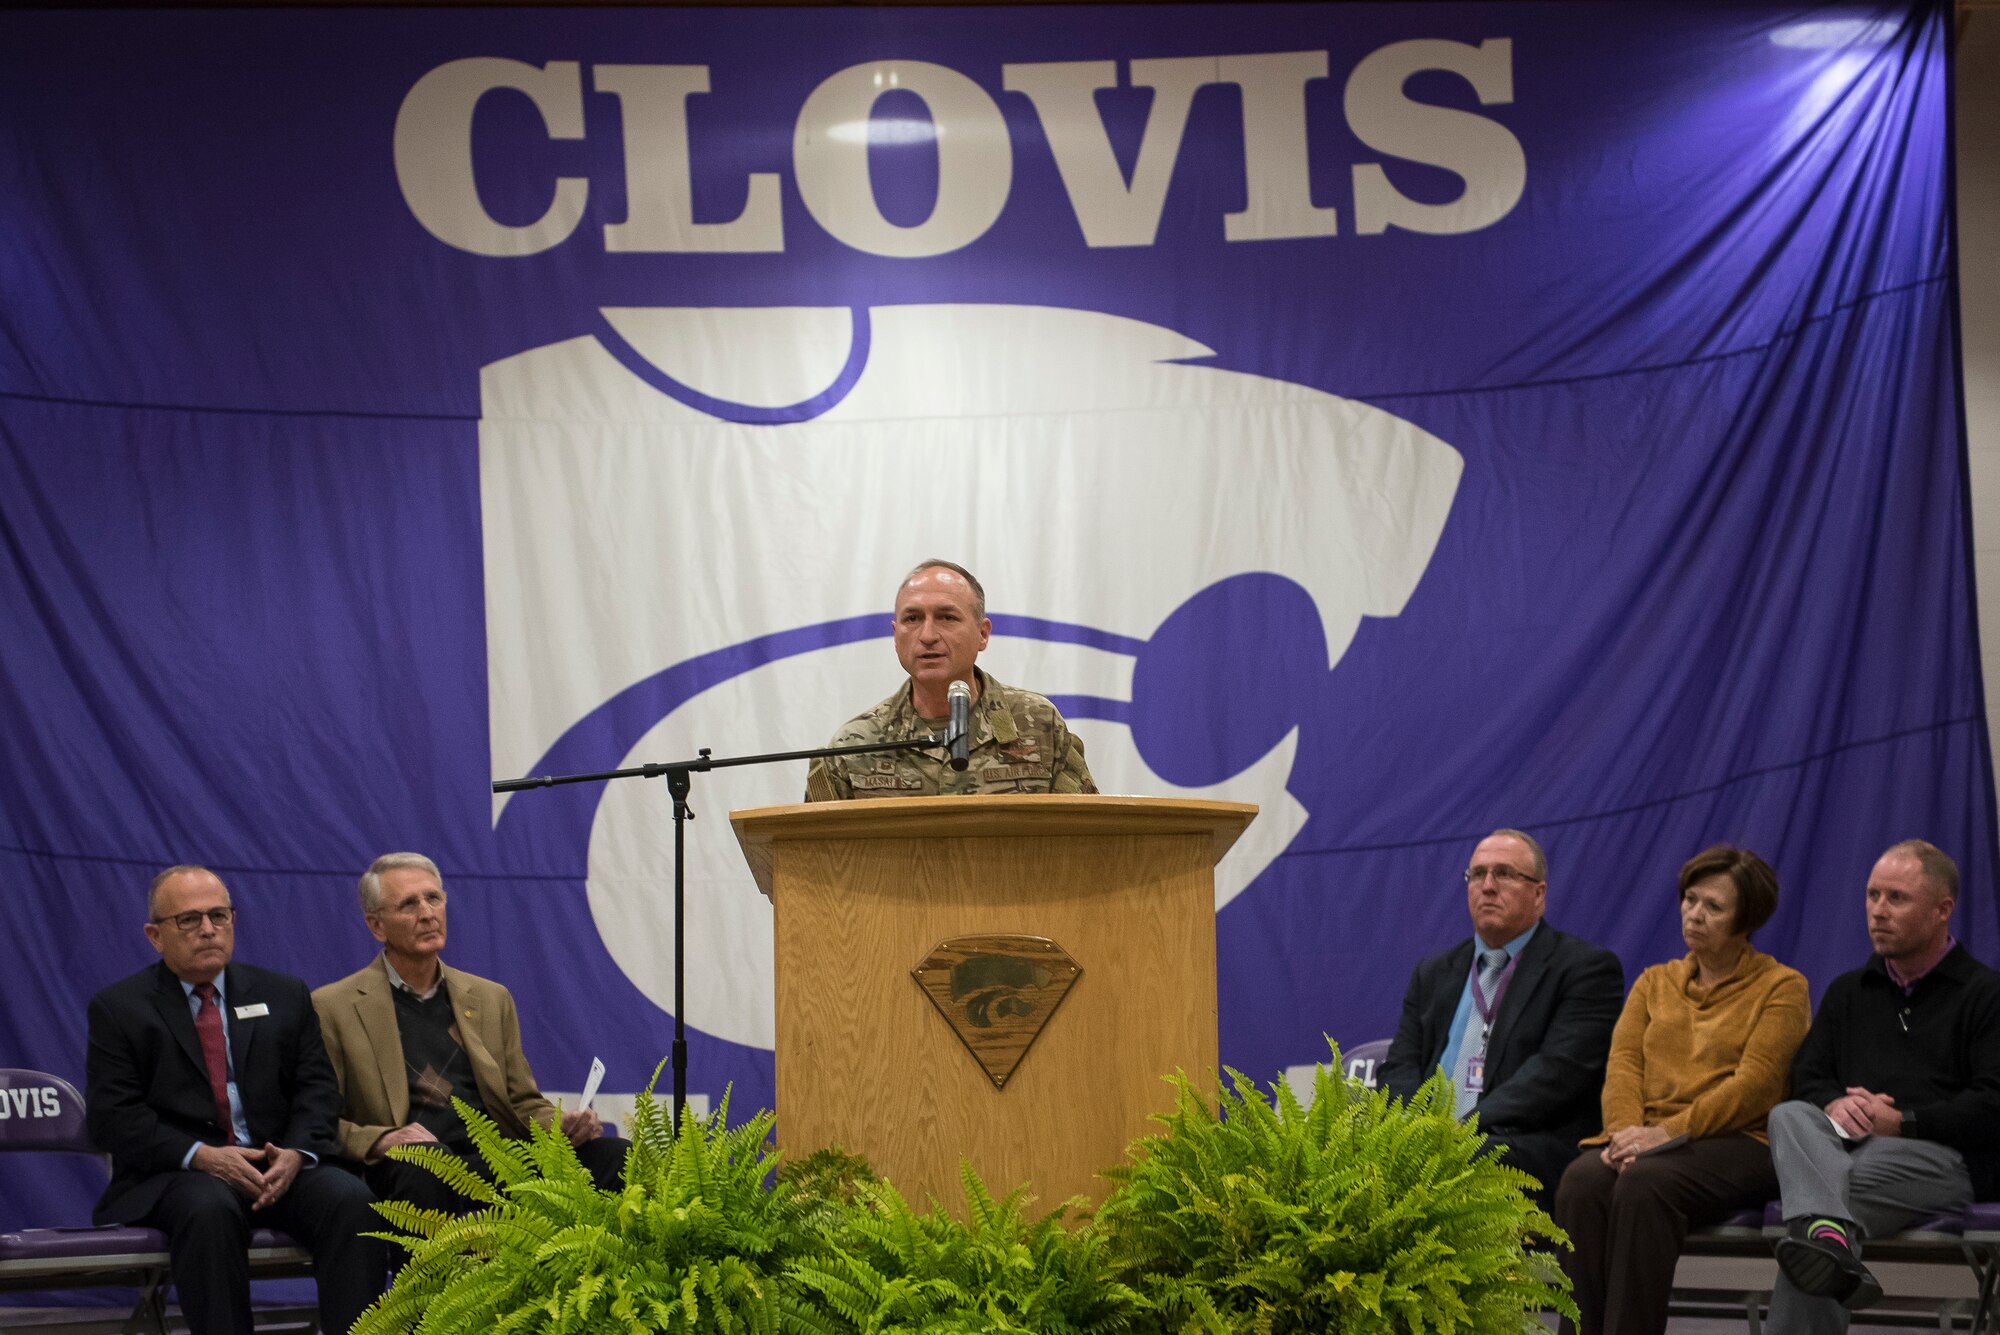 Col. Robert Masaitis, 27th Special Operations Wing commander, gives a speech at the National Math and Science Initiative program reveal at Clovis, N.M., Oct. 30, 2019. Clovis High School was selected for the program due to the high number of military dependents attending the school. (U.S. Air Force photo by Senior Airman Vernon R. Walter)